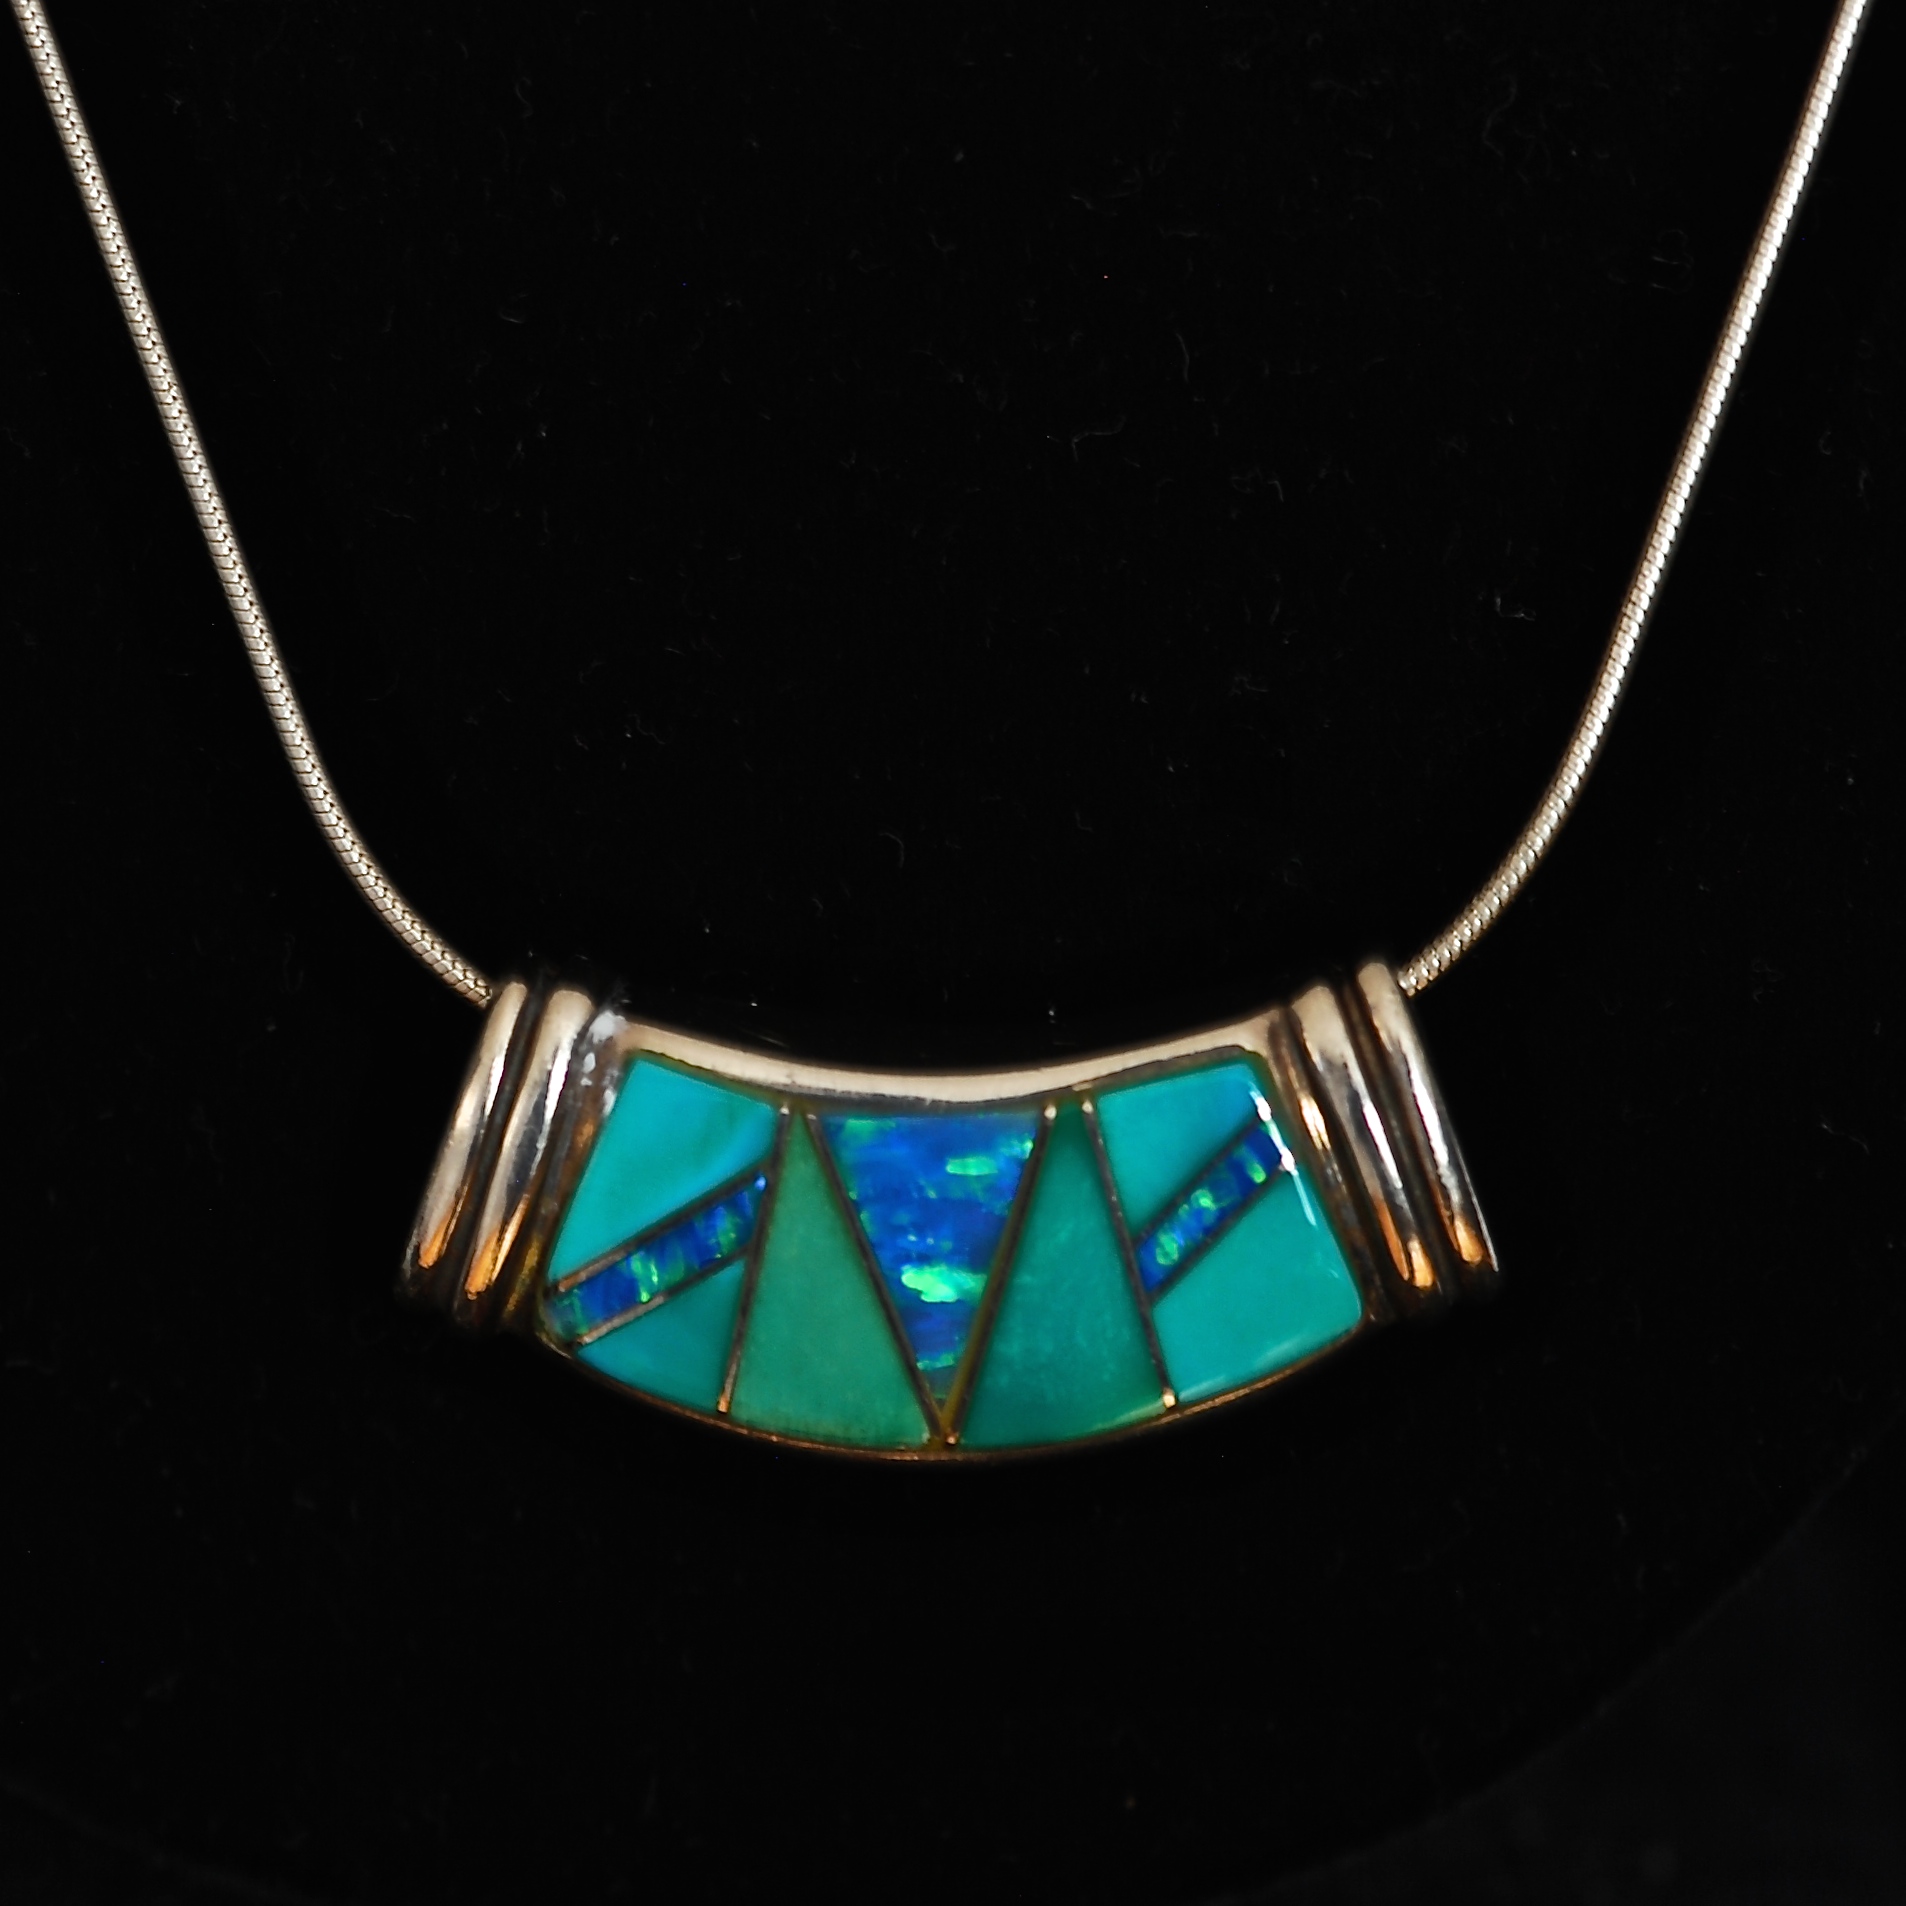 Sterling Silver Pendant Necklace Featuring Inlaid Turquoise Opal